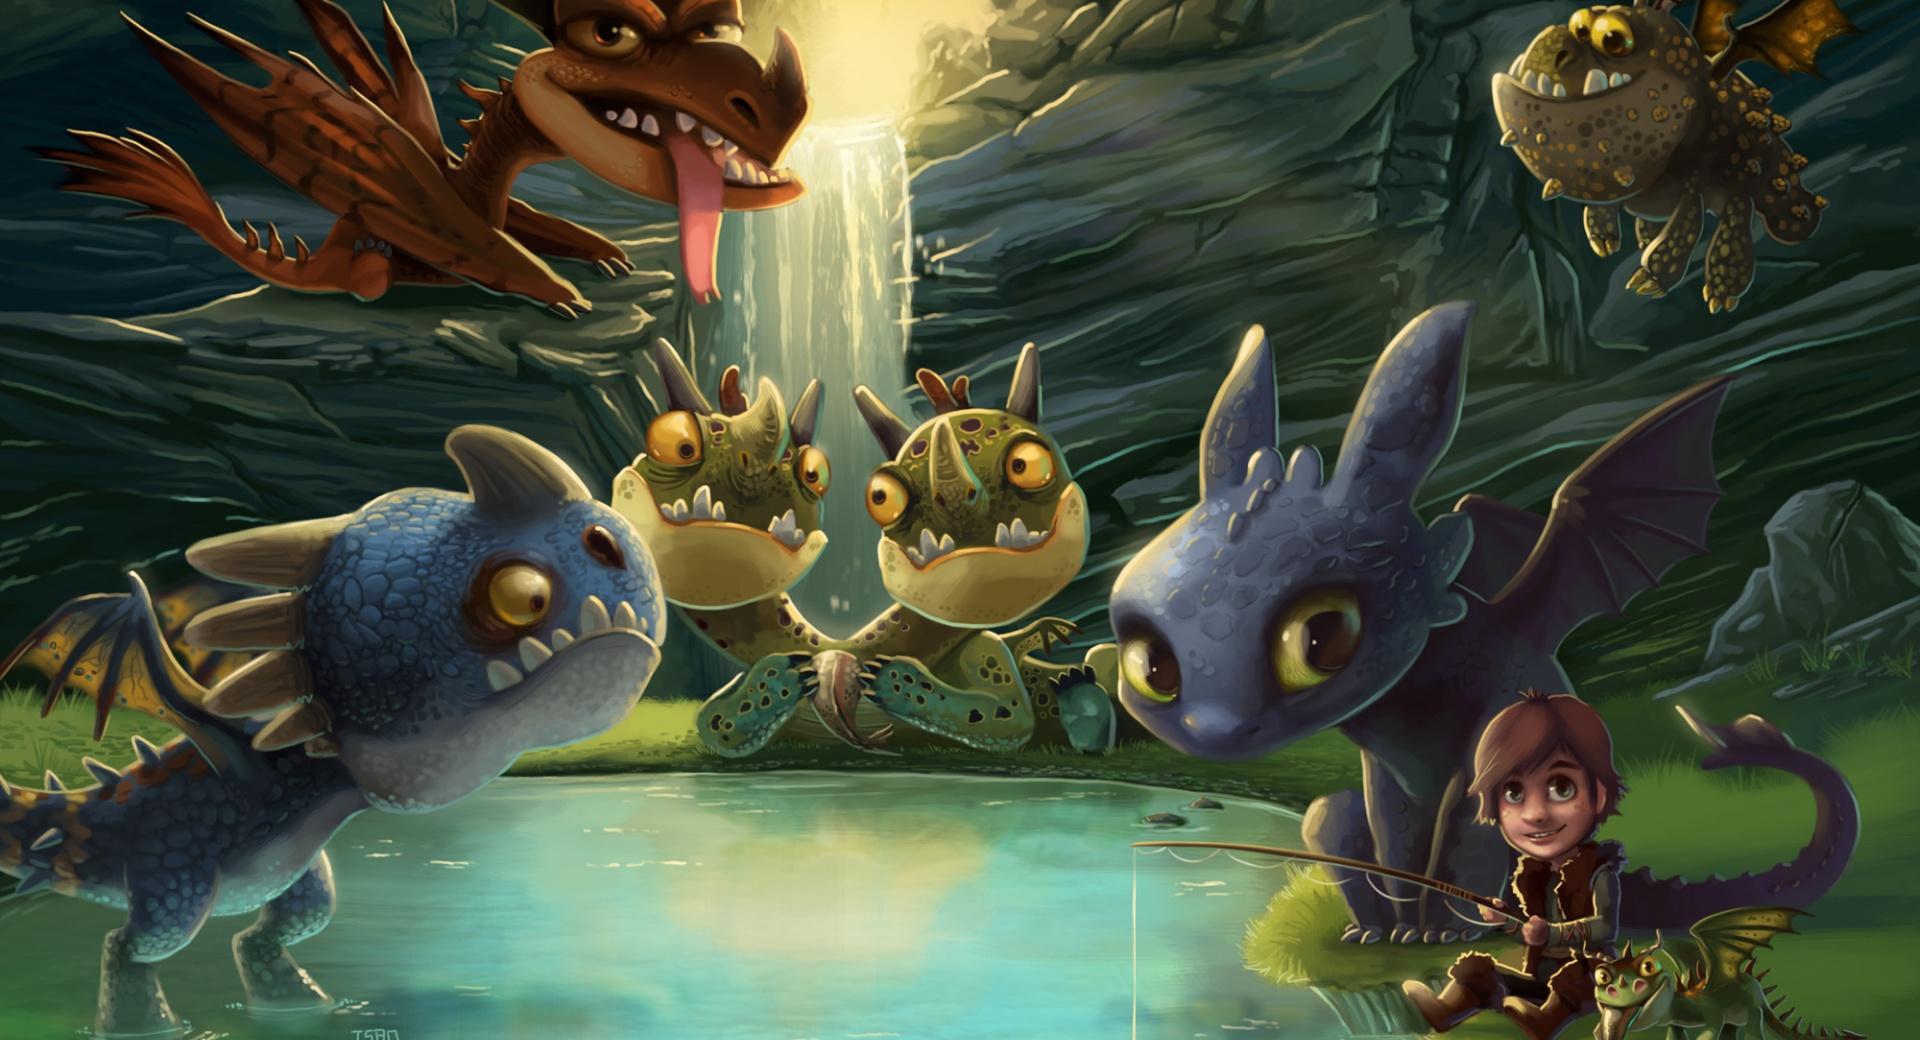 Hiccup, Toothless and friends Wallpaper HD Download